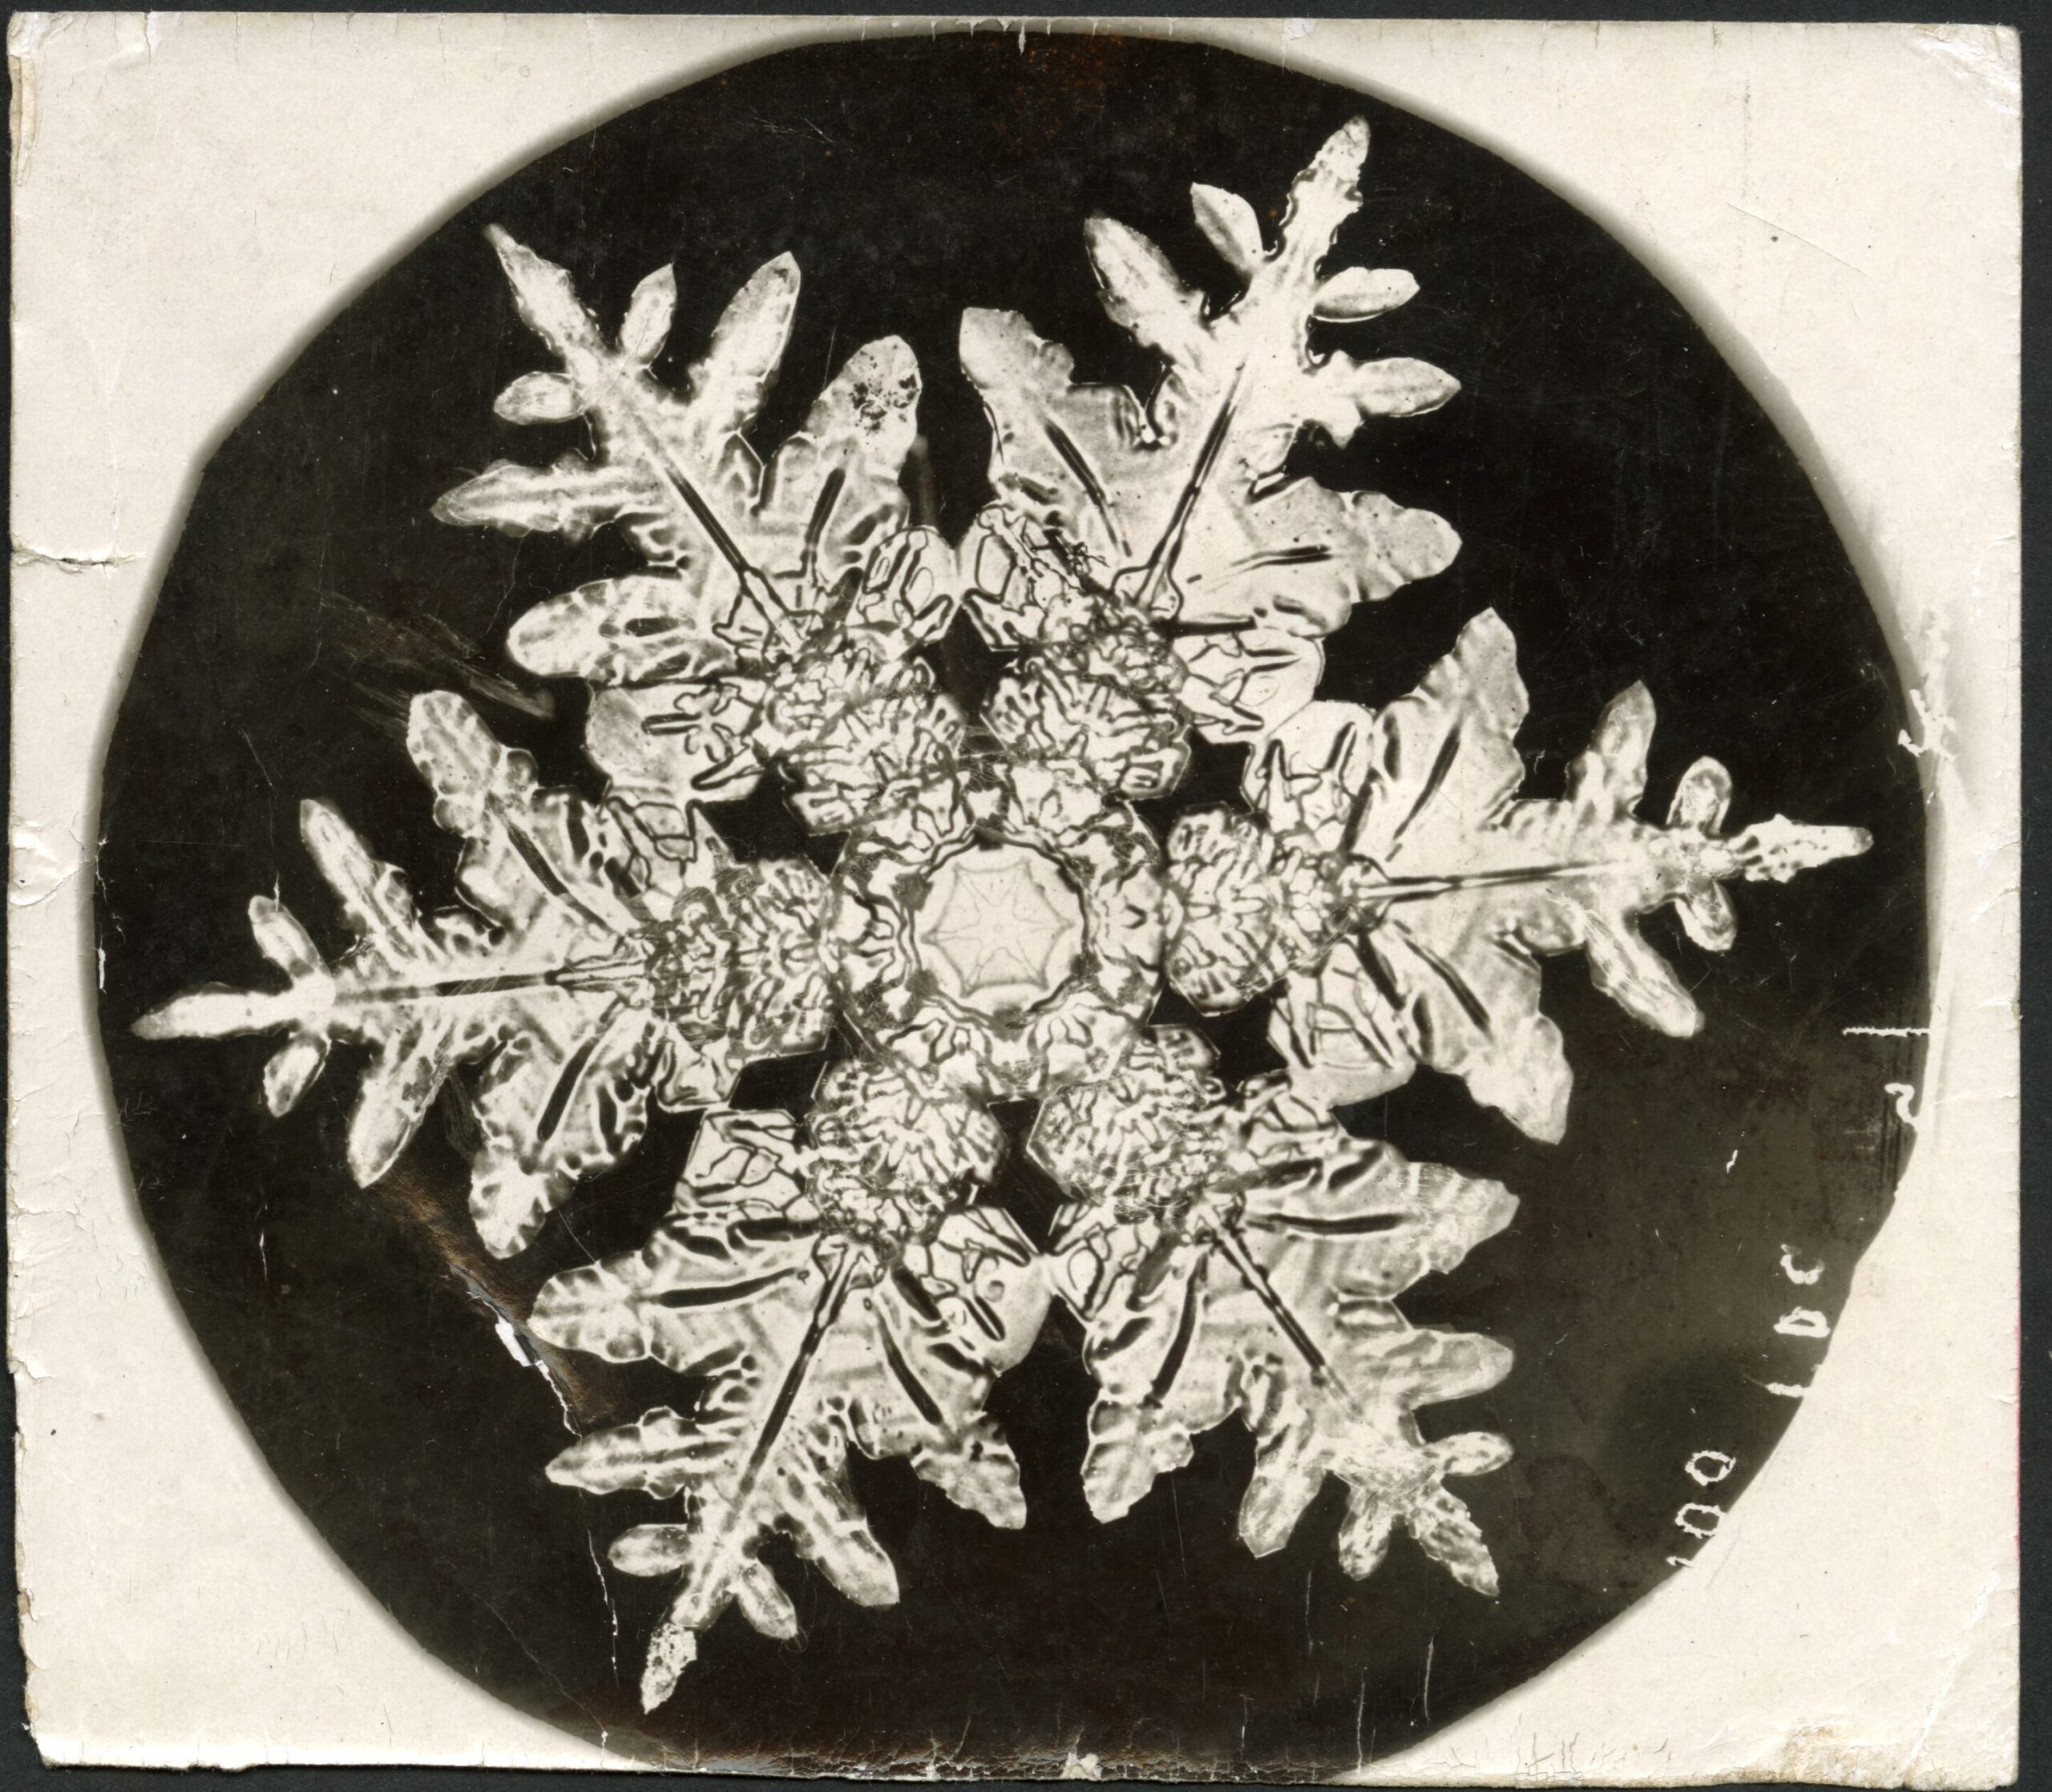 A microscope slide of a white snowflake on a black background.